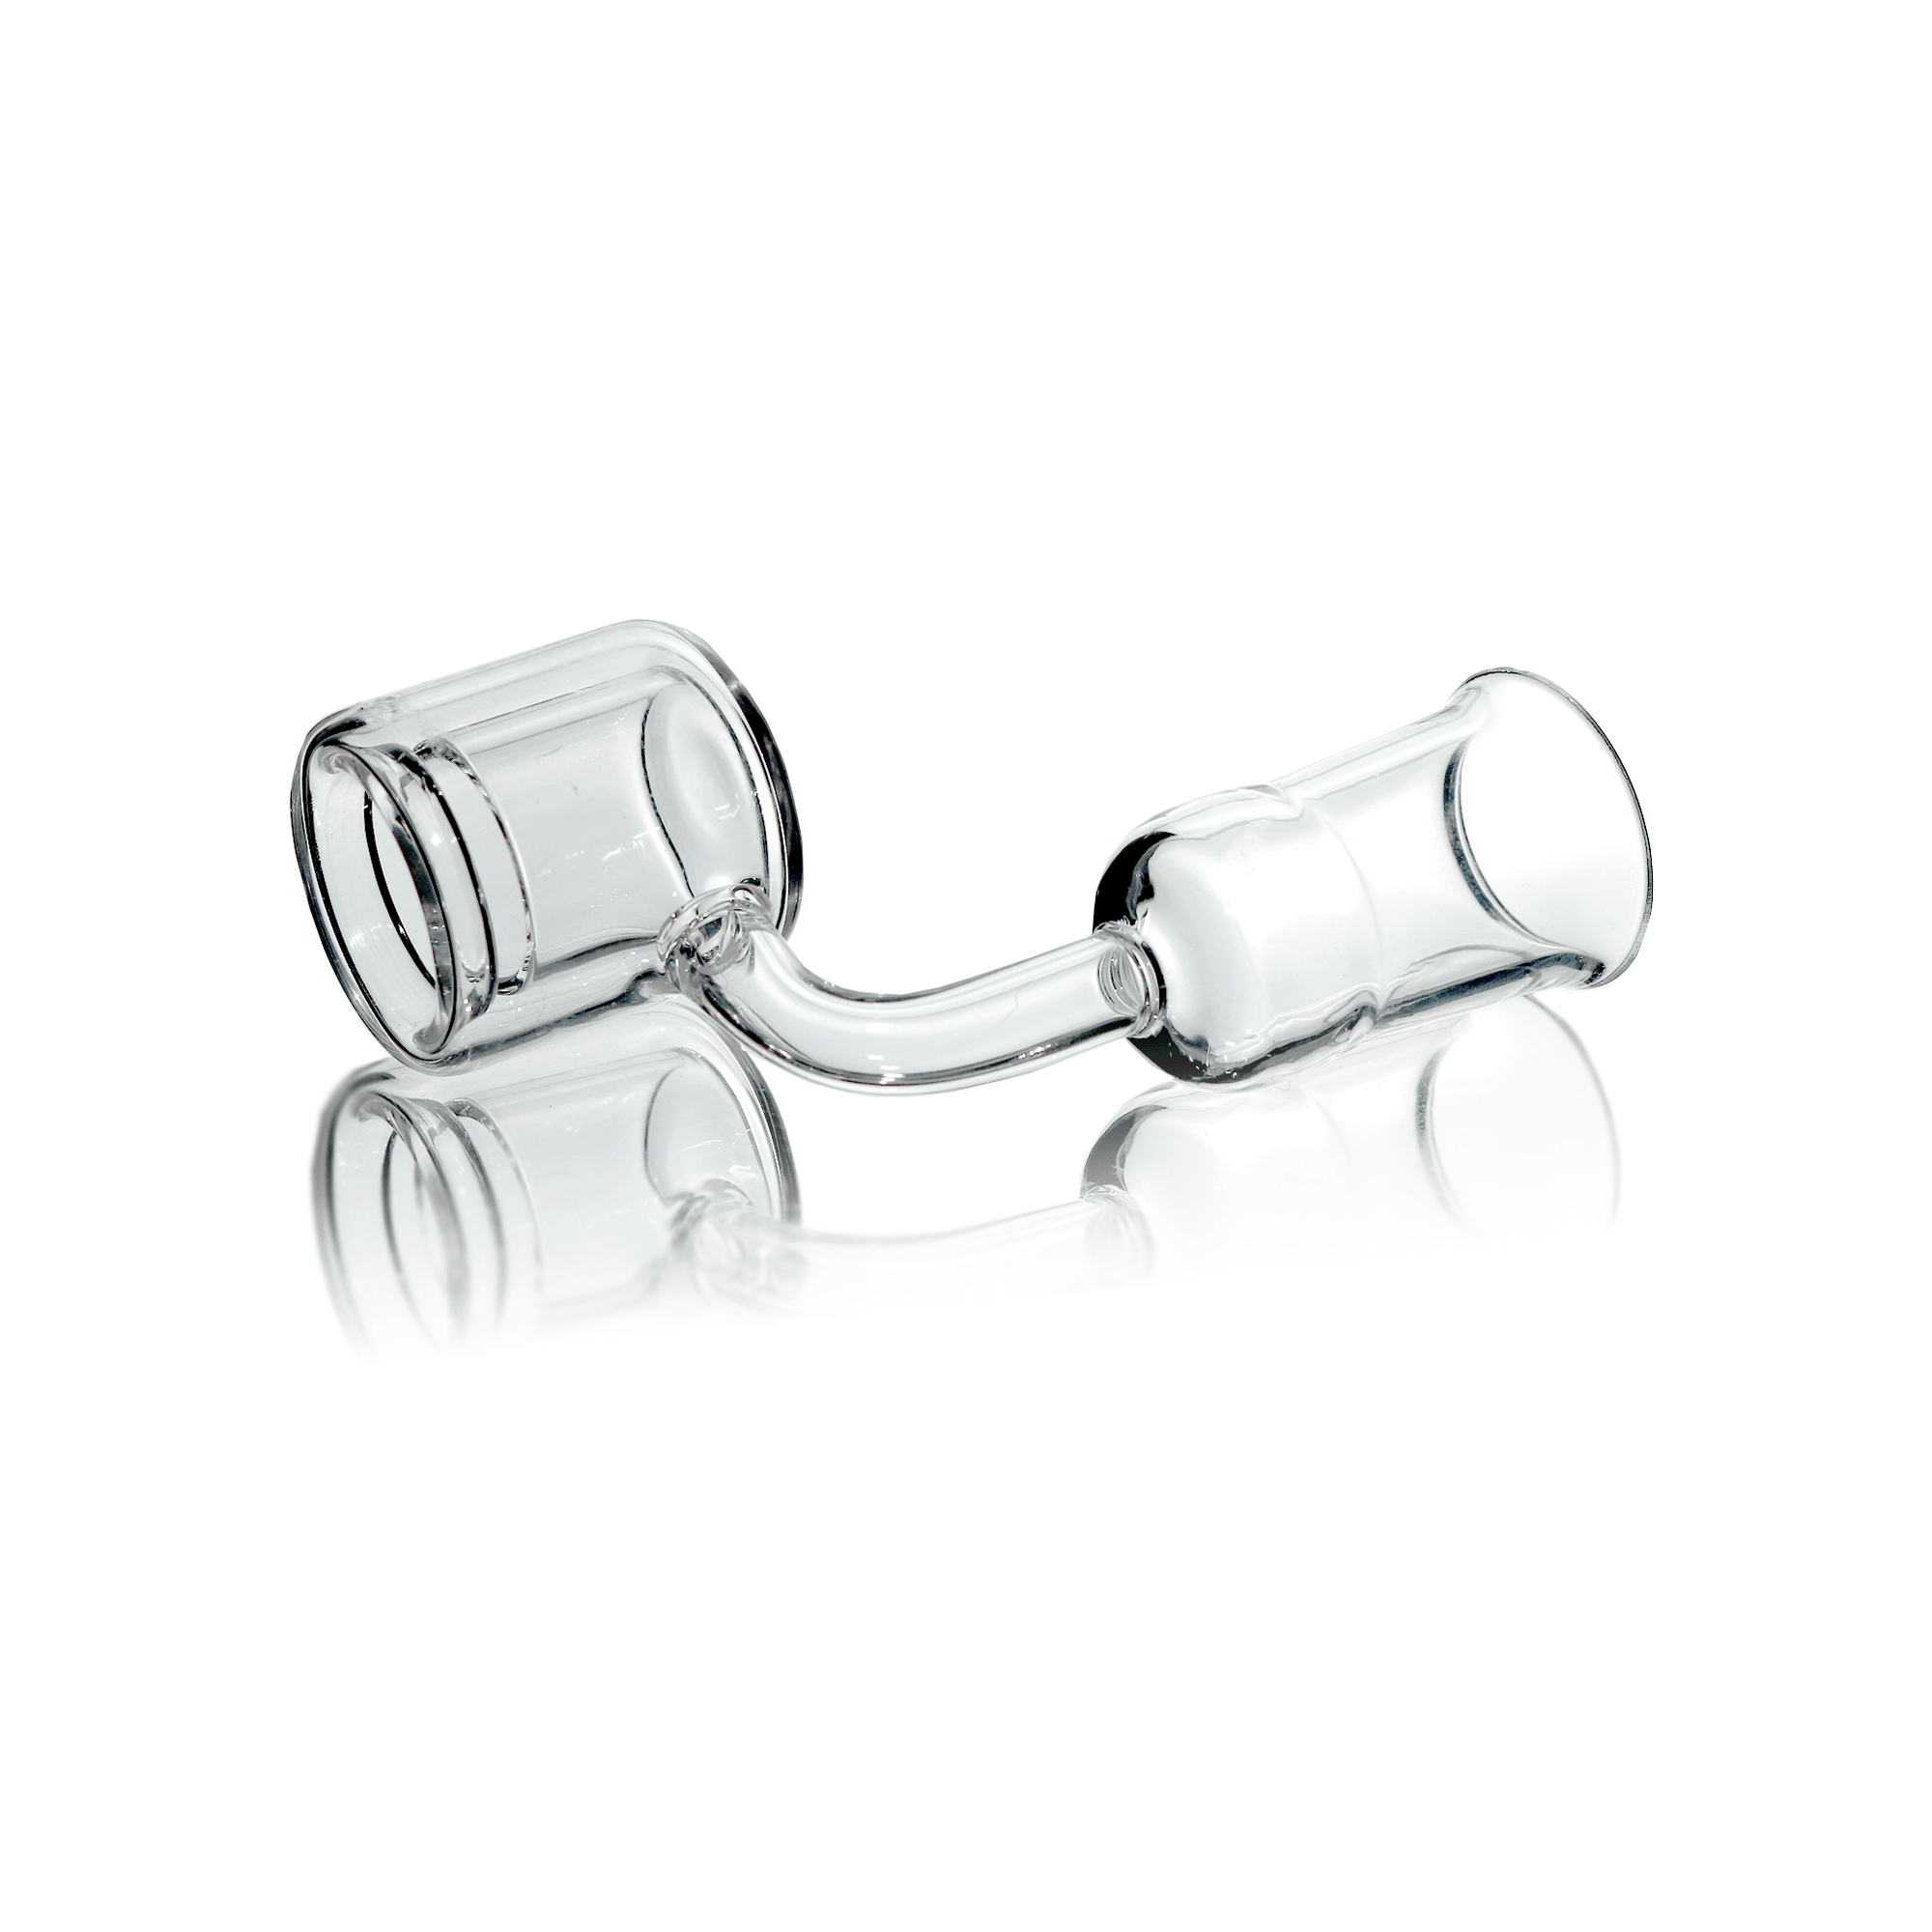 Quartz Double Wall Banger (Torch) | 18mm Female | the dabbing specialists